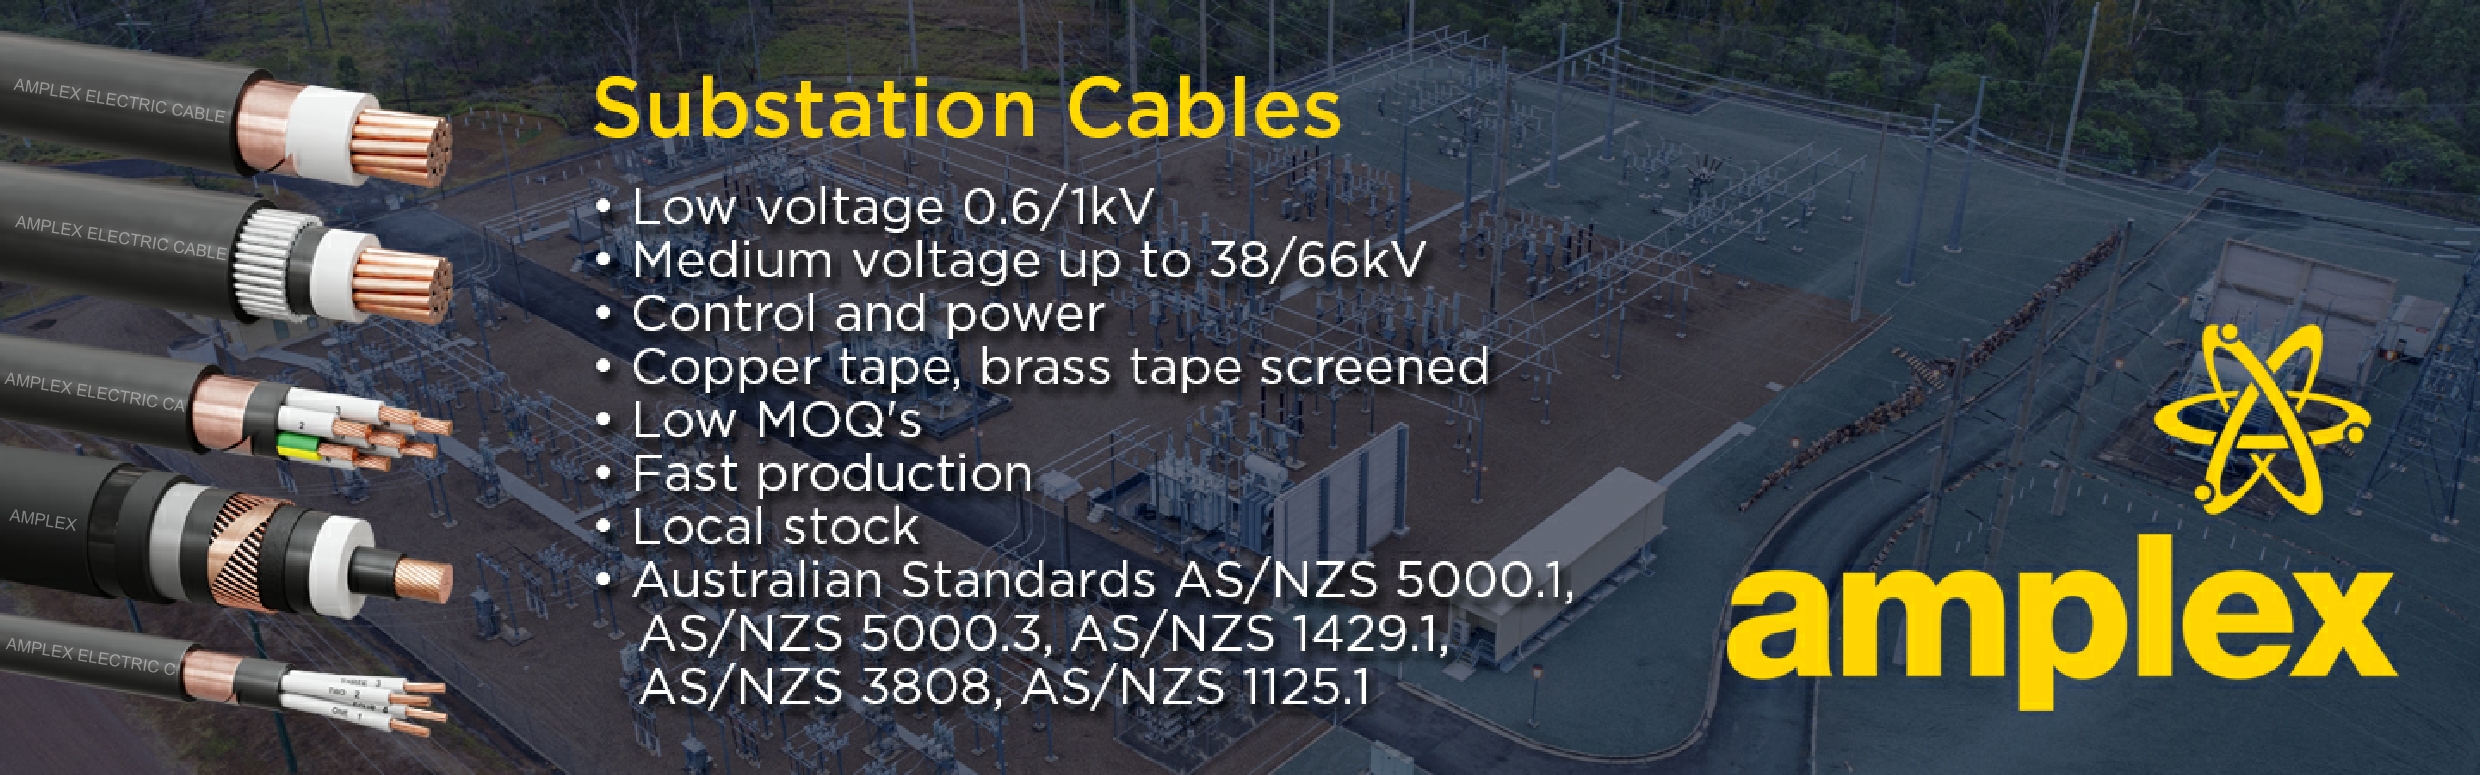 Substation Cables